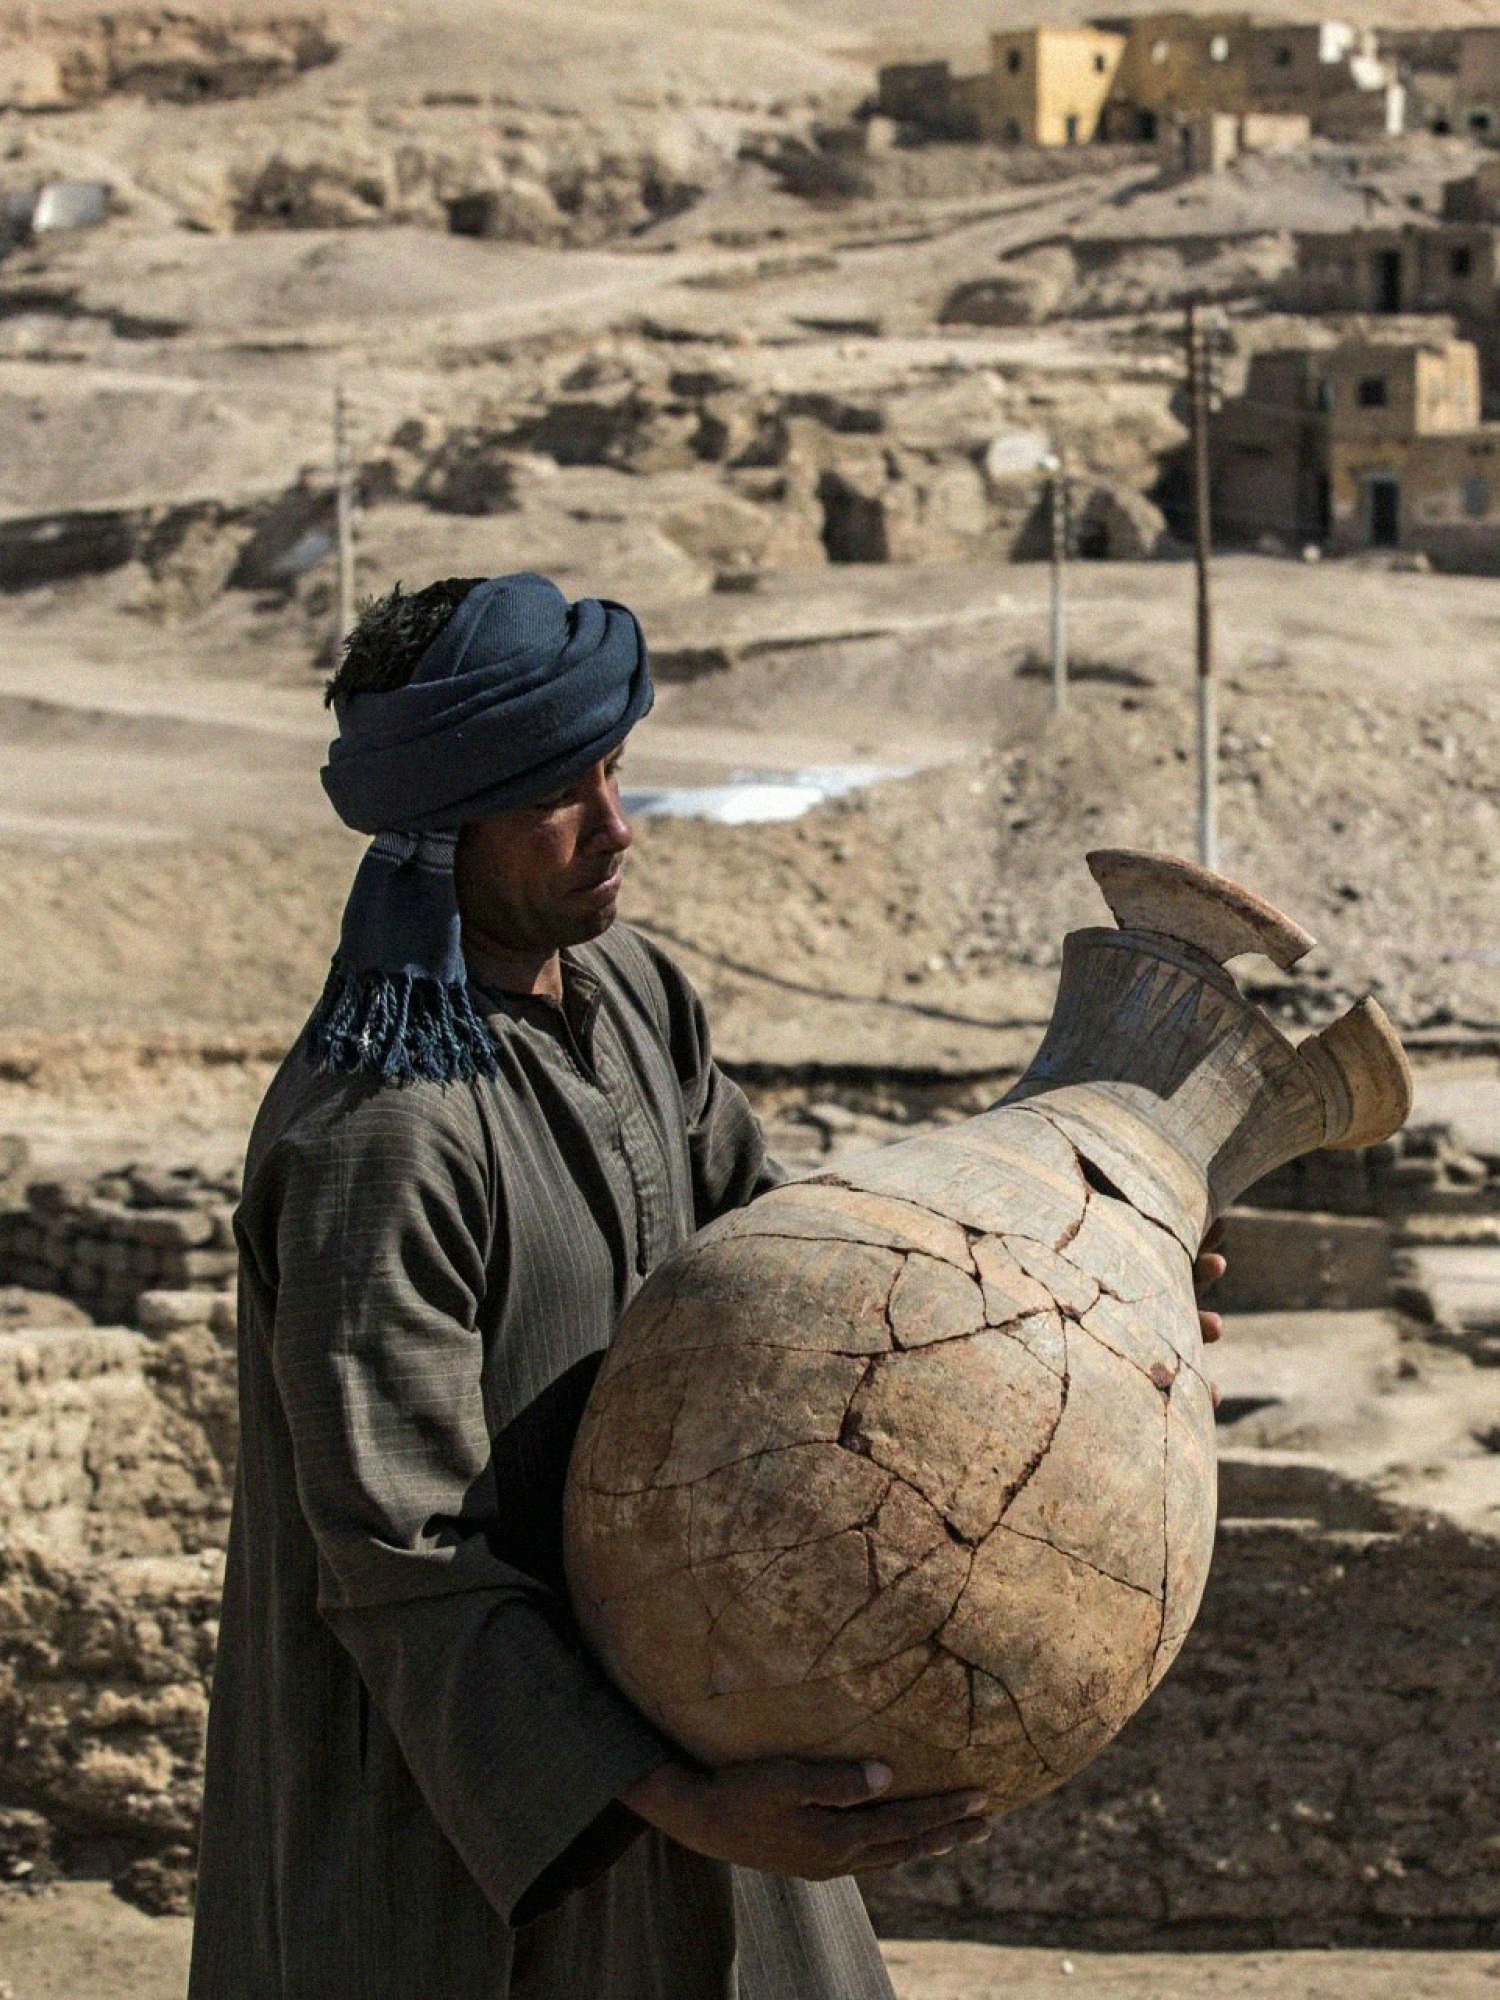 A man carrying a large cracked pot.